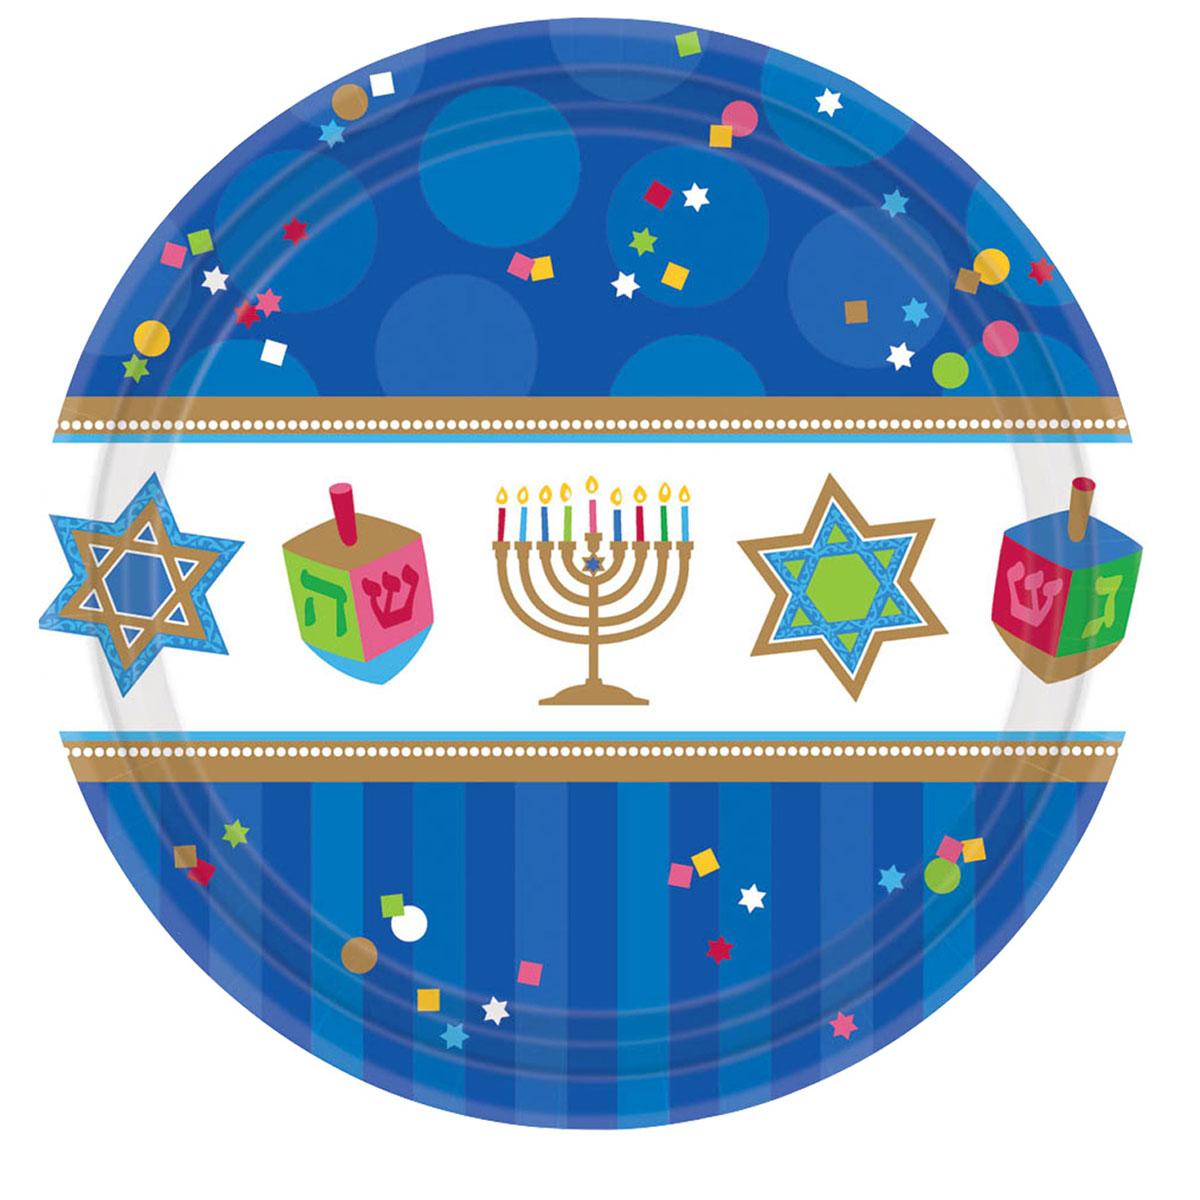 Hanukkah Celebrations Paper Plates 18cm - pk18 by Amscan 743803 available here at Karnival Costumes online party shop